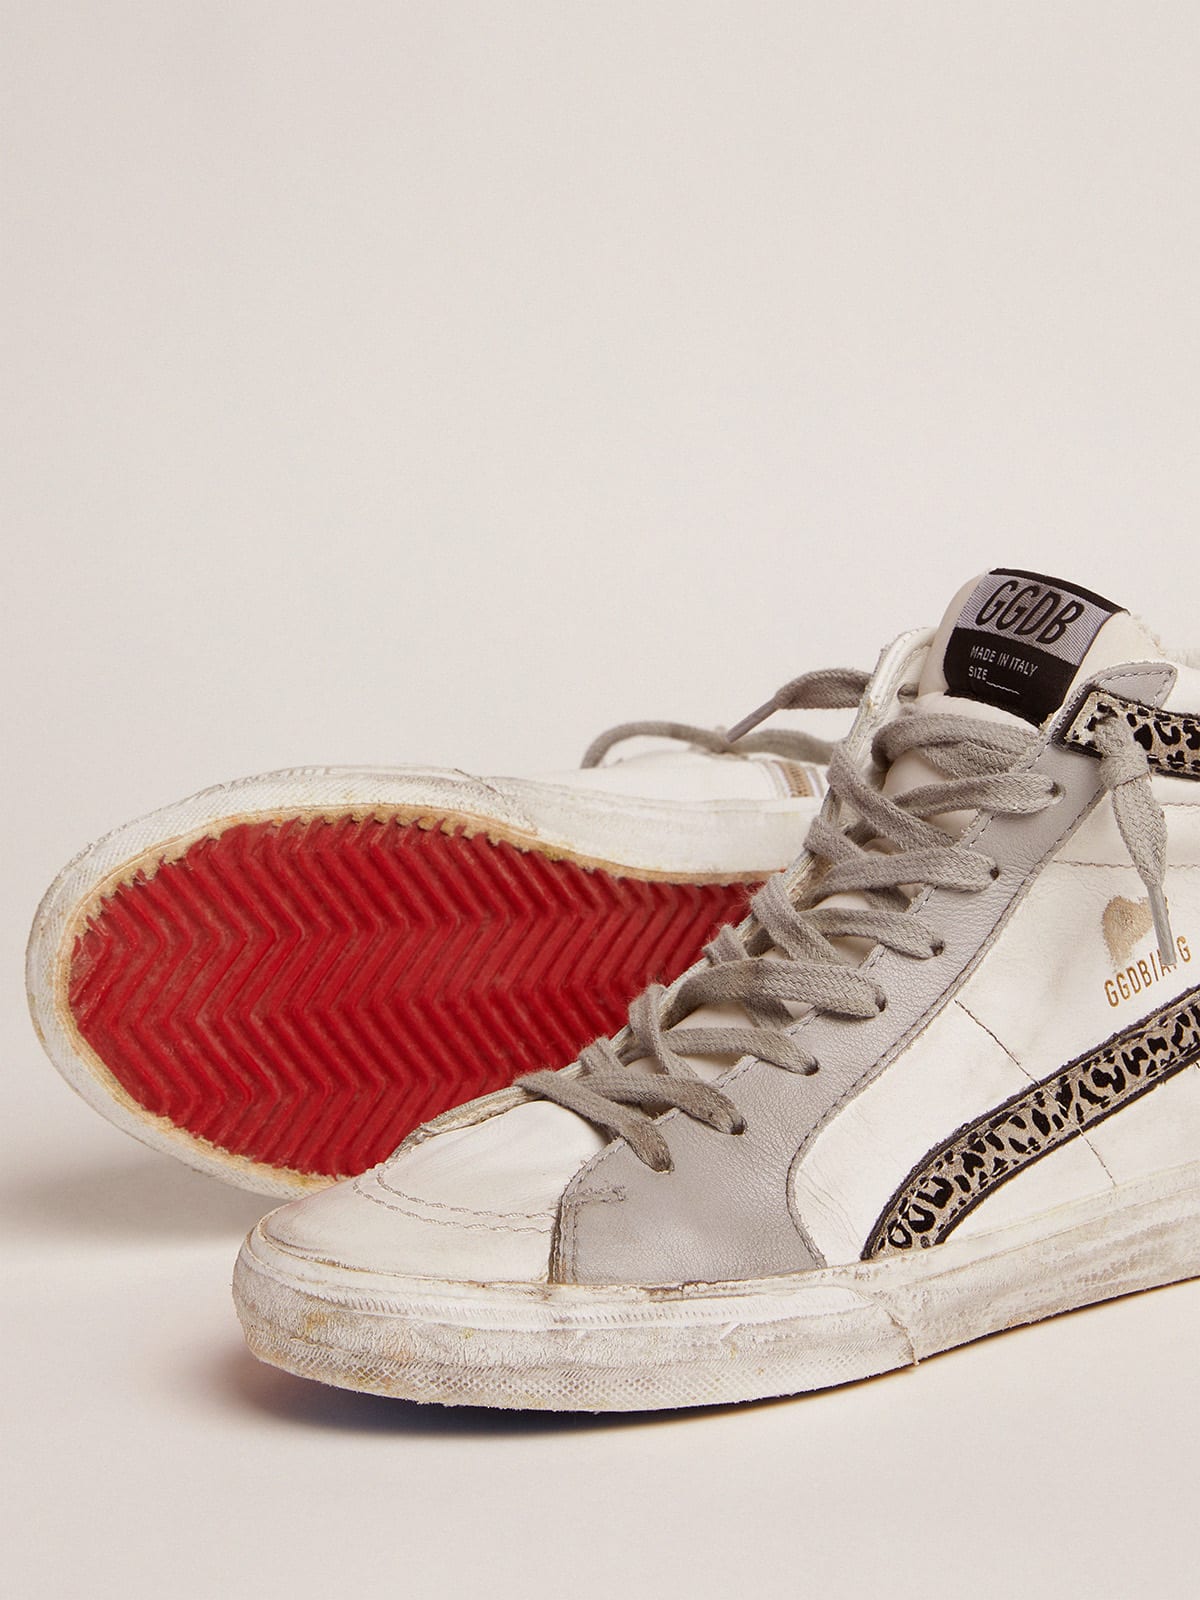 Slide sneakers with white and gray leather upper and leopard-print suede  flash | Golden Goose